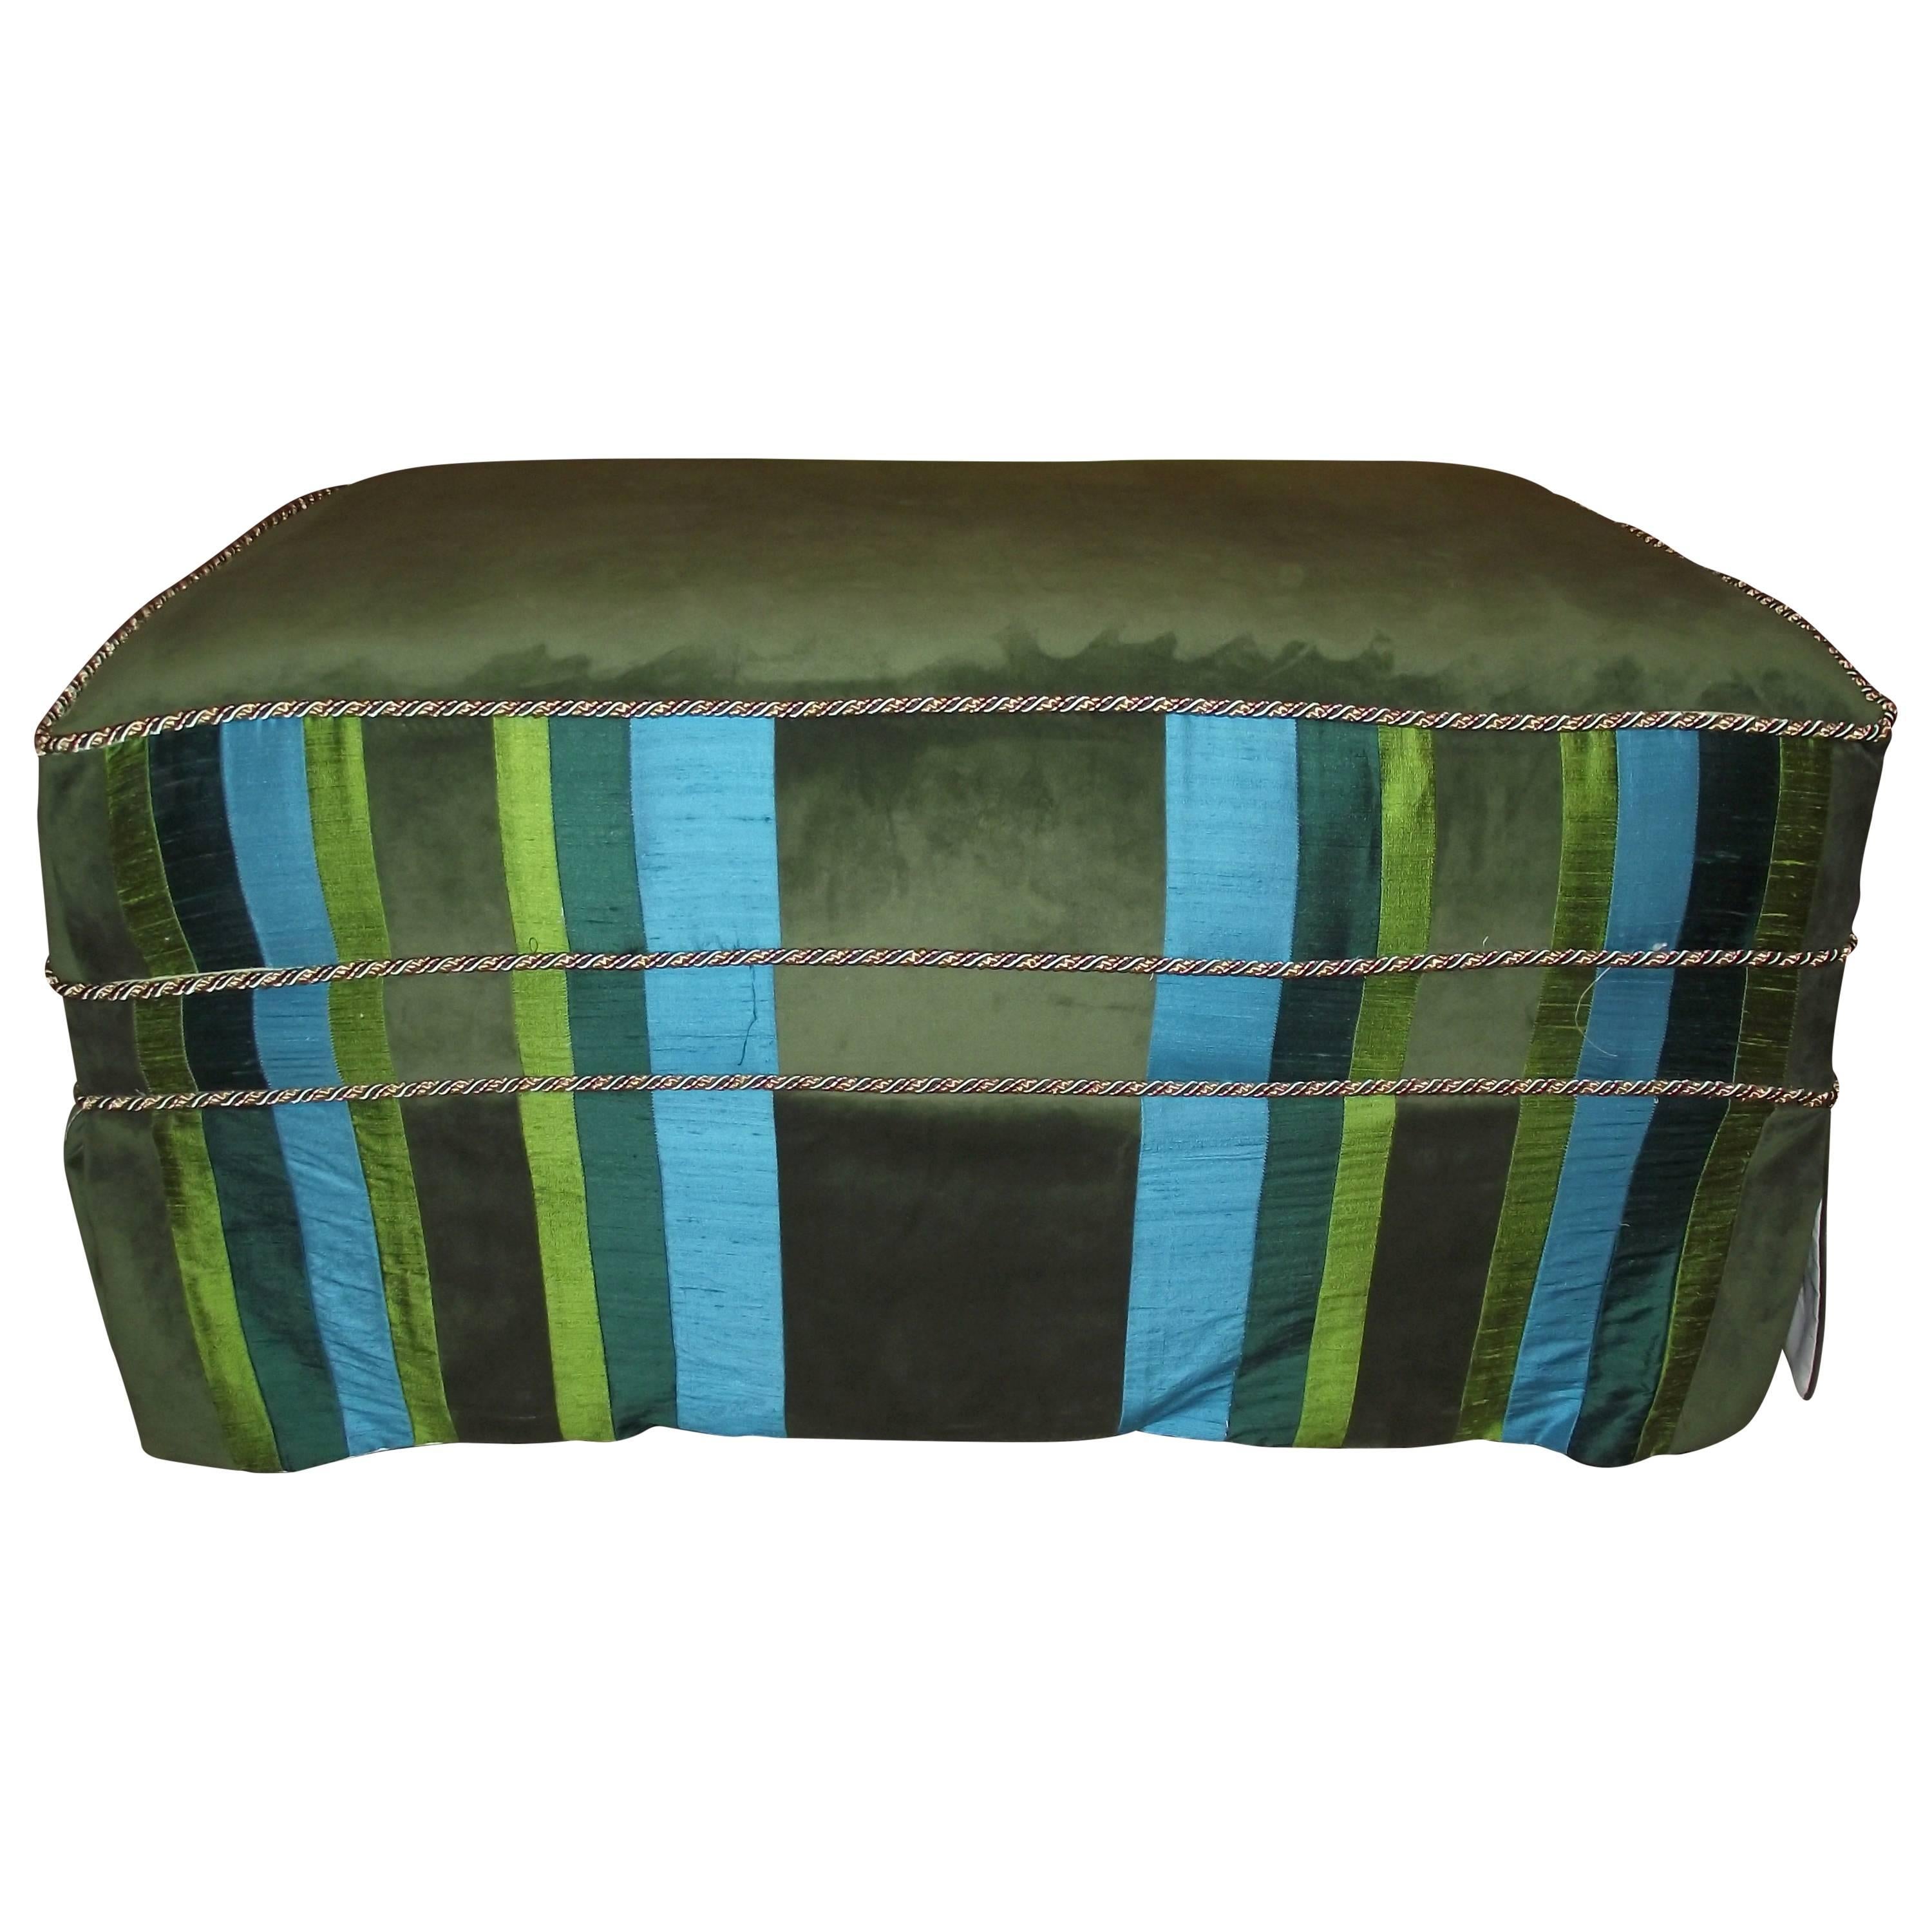 Ottoman/Coffee Table Size Slip Covered Turquoise Blue and Green Stripe  For Sale